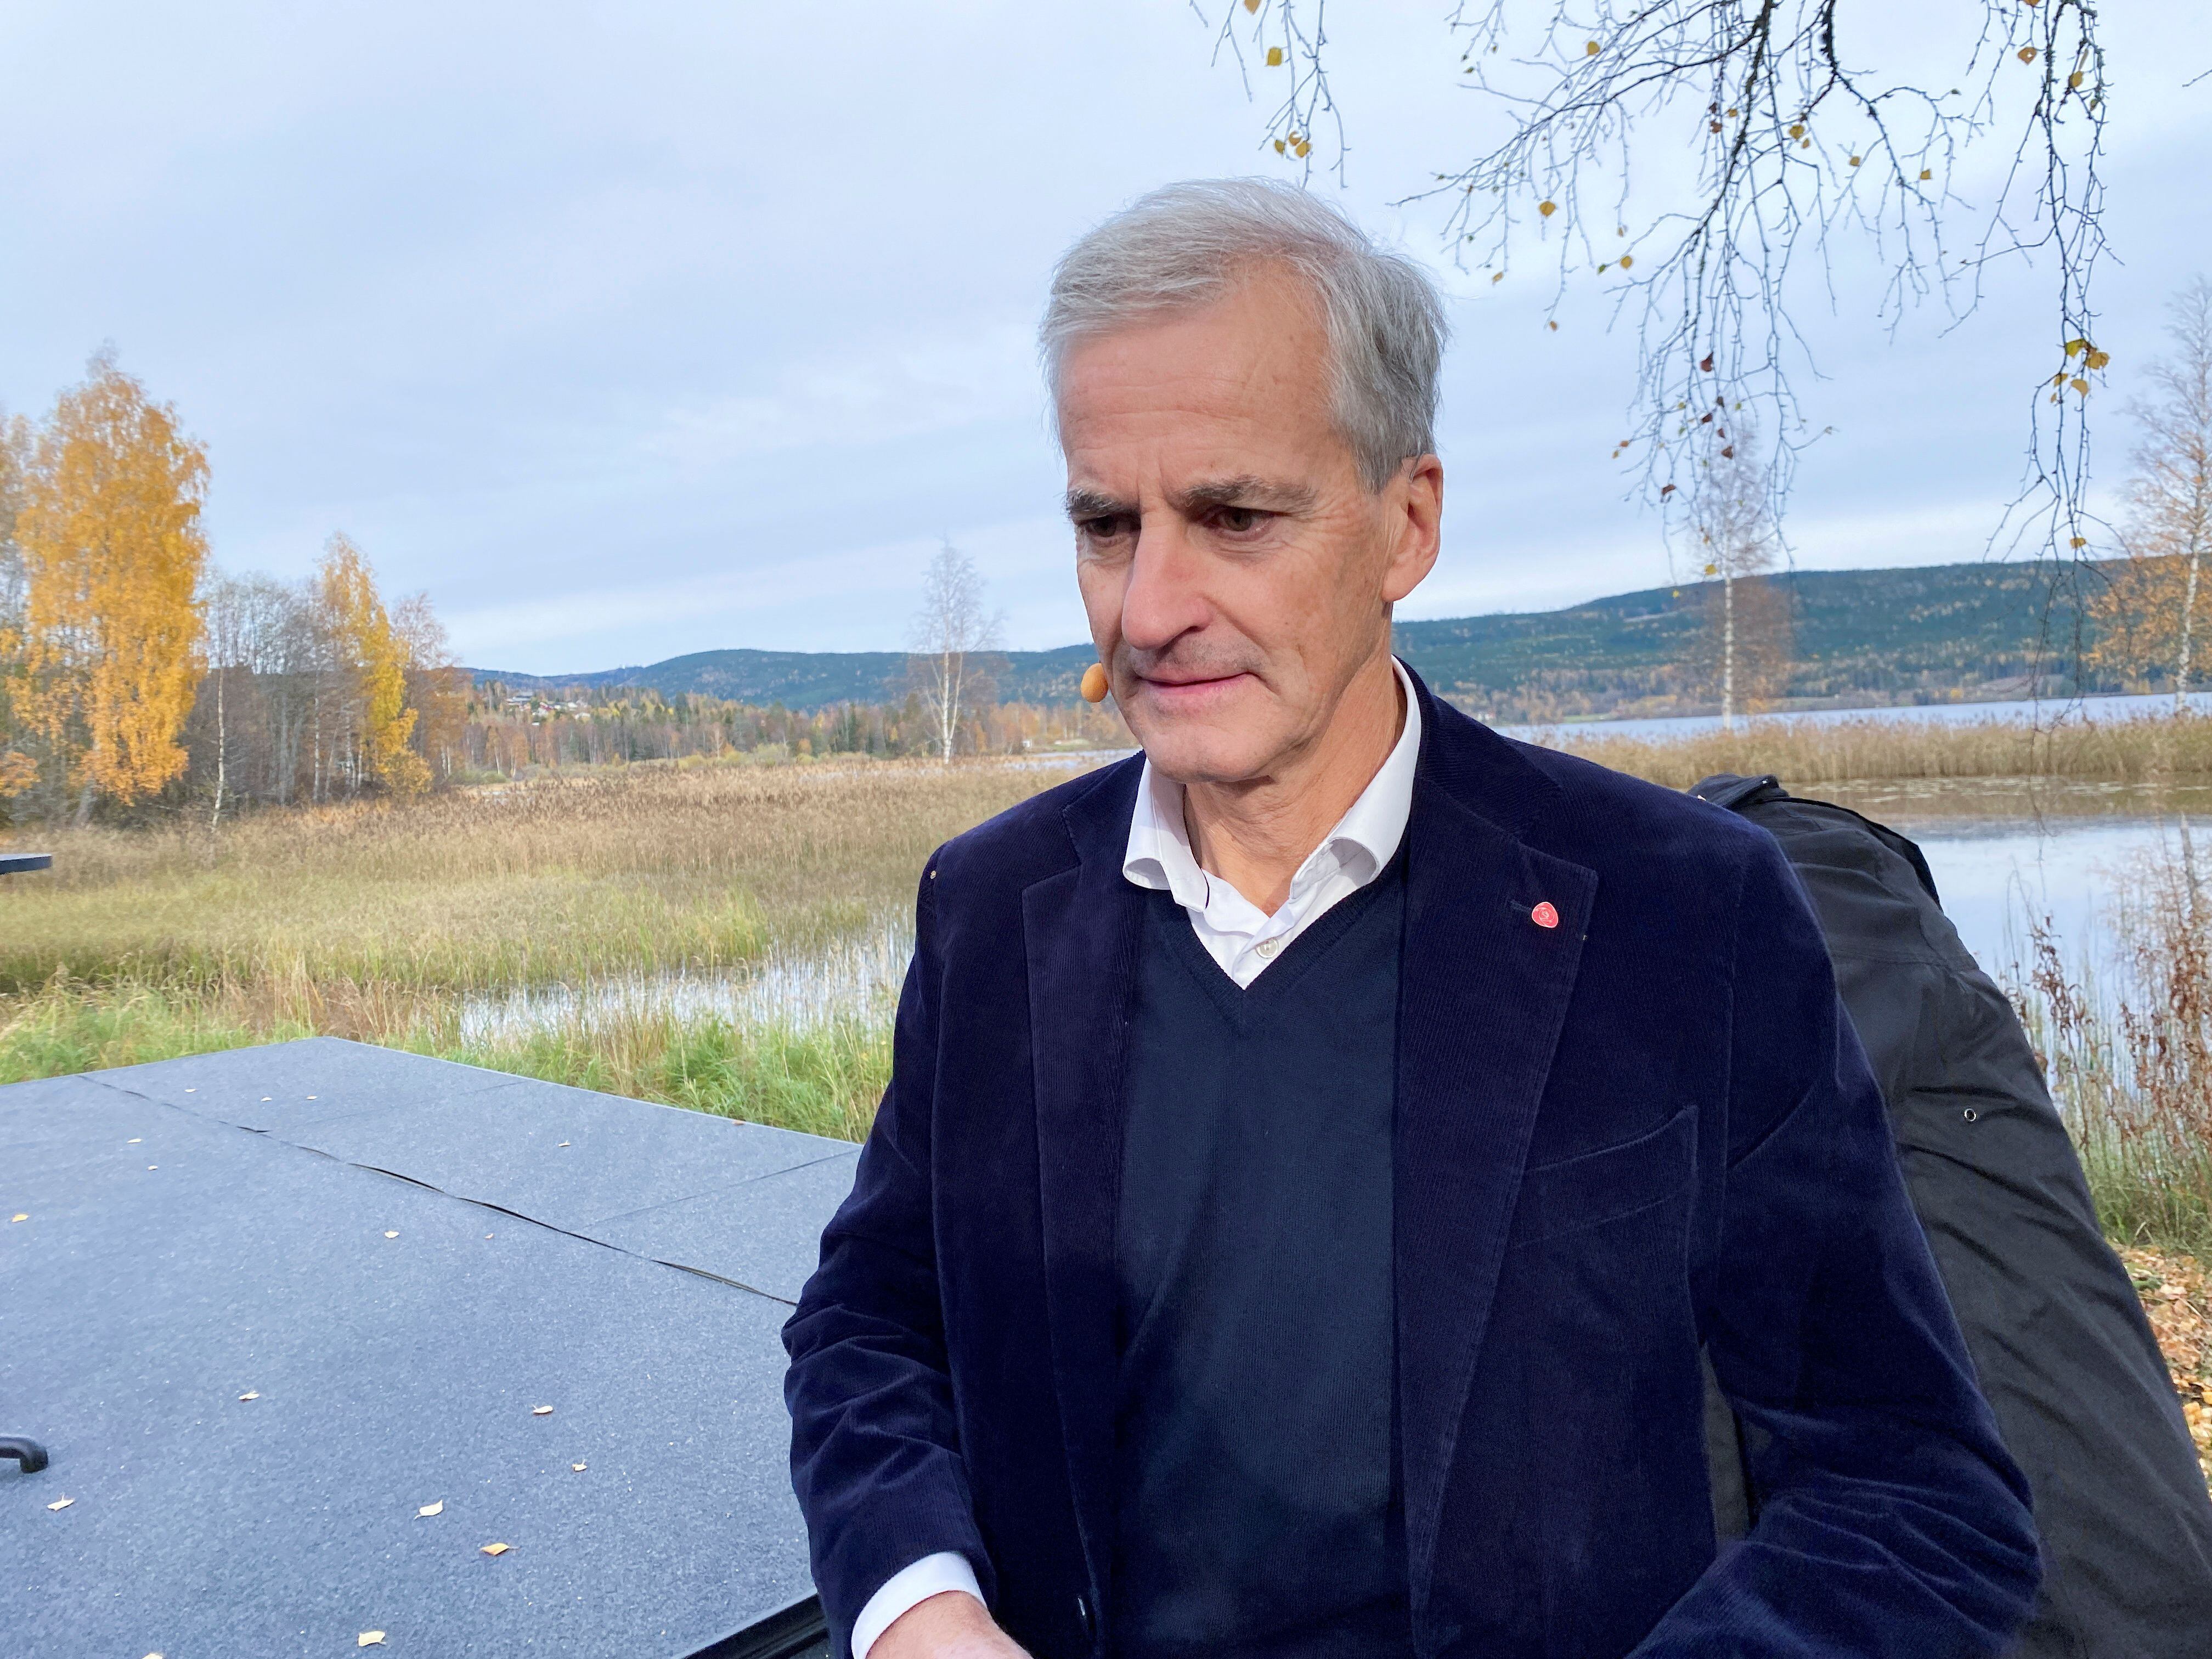 FILE PHOTO: Norway's incoming Prime Minister and Labor leader Jonas Gahr Stoere in Hurdal, Norway on October 13, 2021. REUTERS / Victoria Klesty